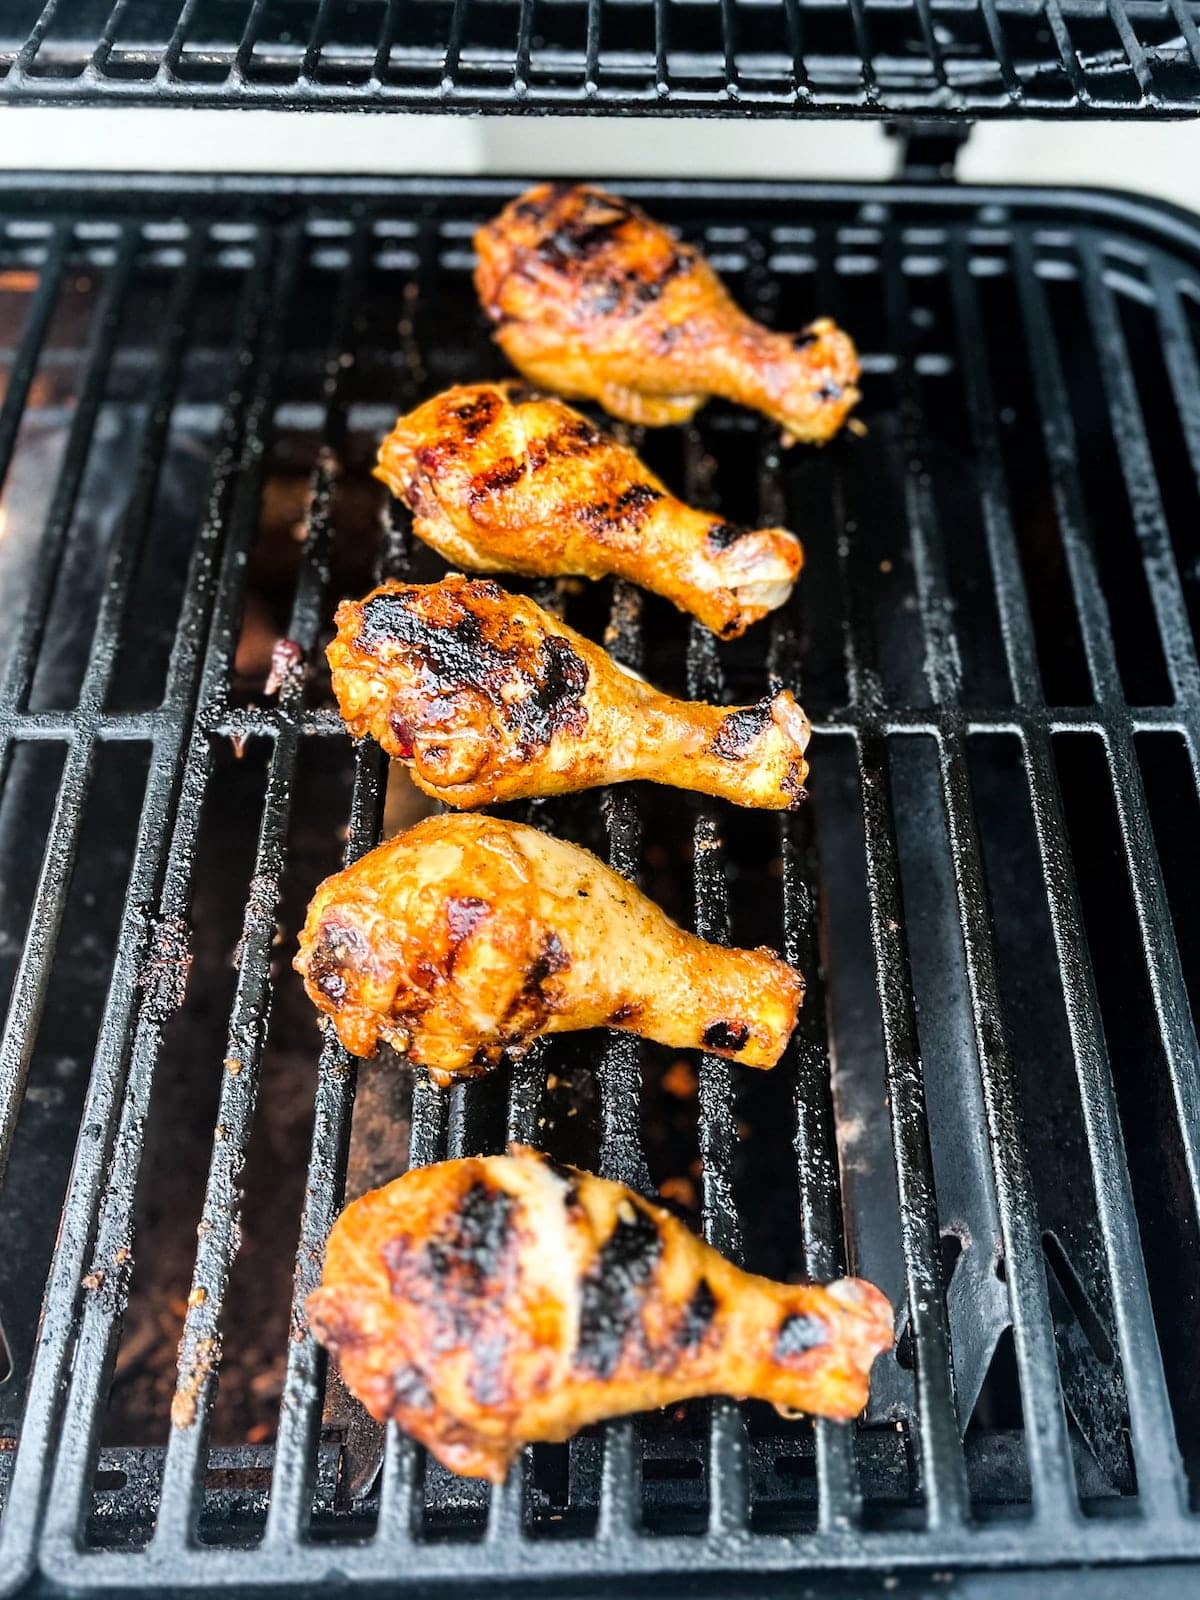 BBQ chicken legs cooking on the grill..